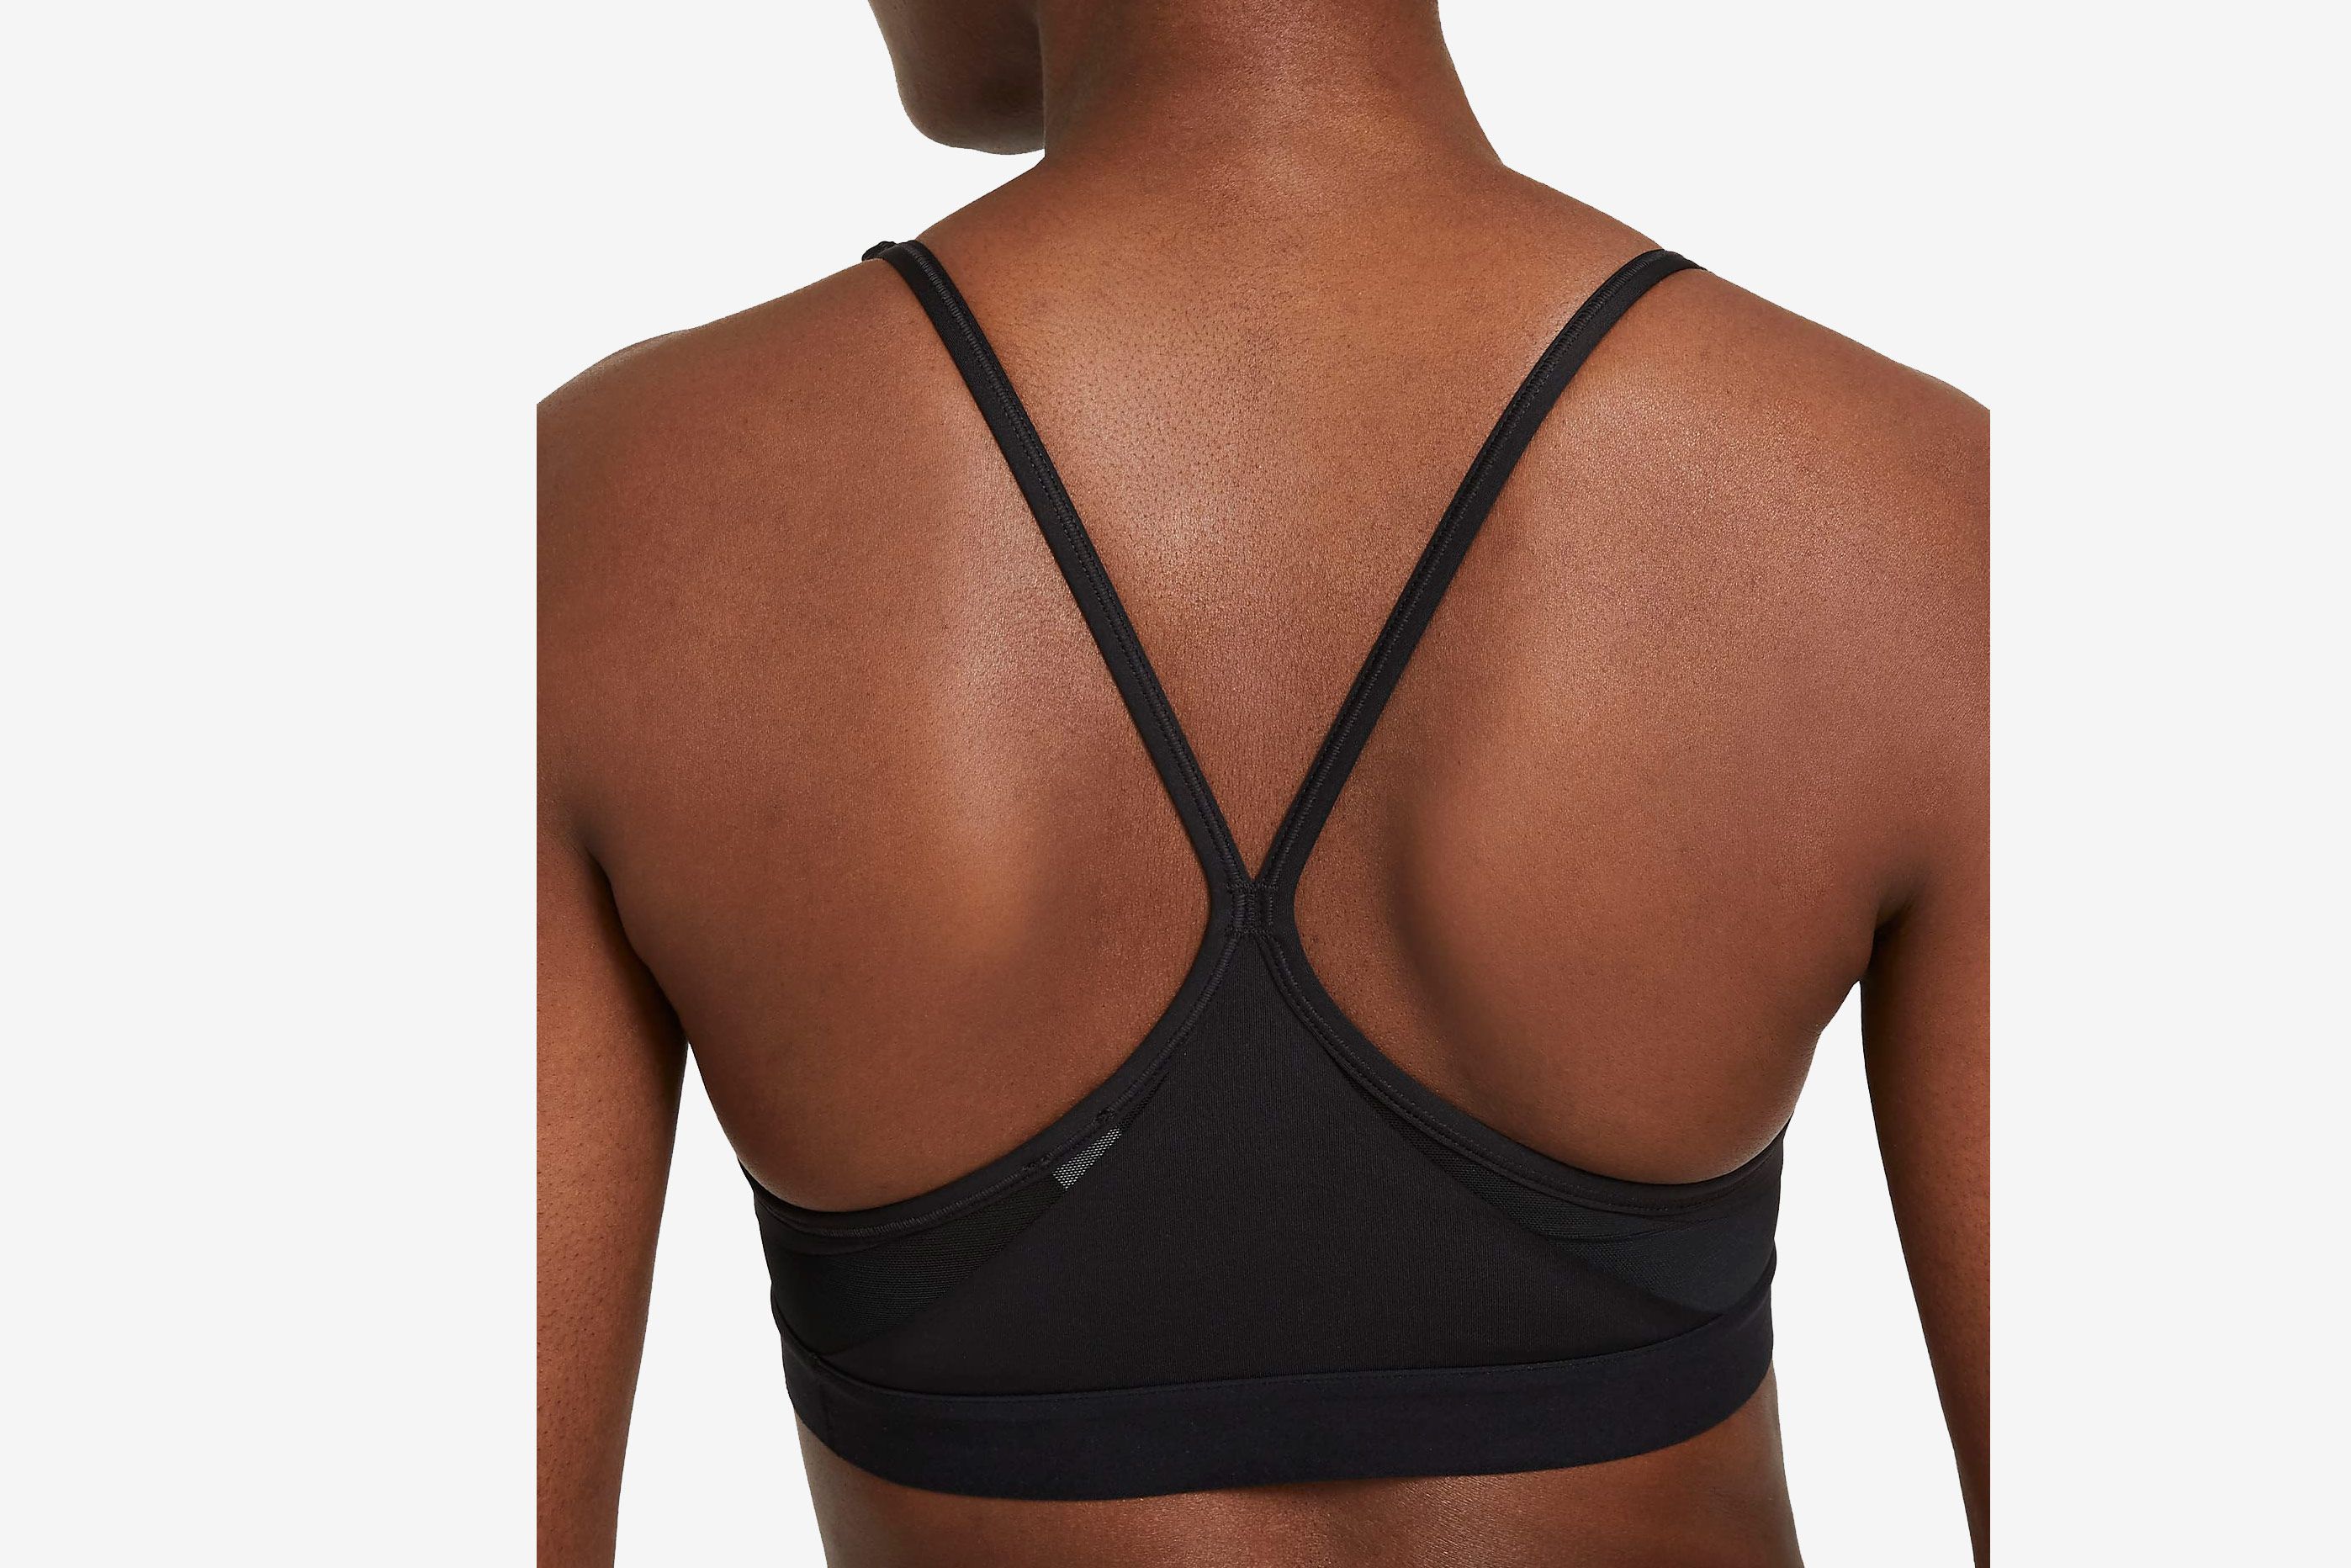 Woweny High Impact Zip Front Sports Bra Wireless Post Surgery with Removable Pads Built Up Bounce Control Yoga Tank Tops Workout Gym Activewear Racerback Anti-Sagging Bra 